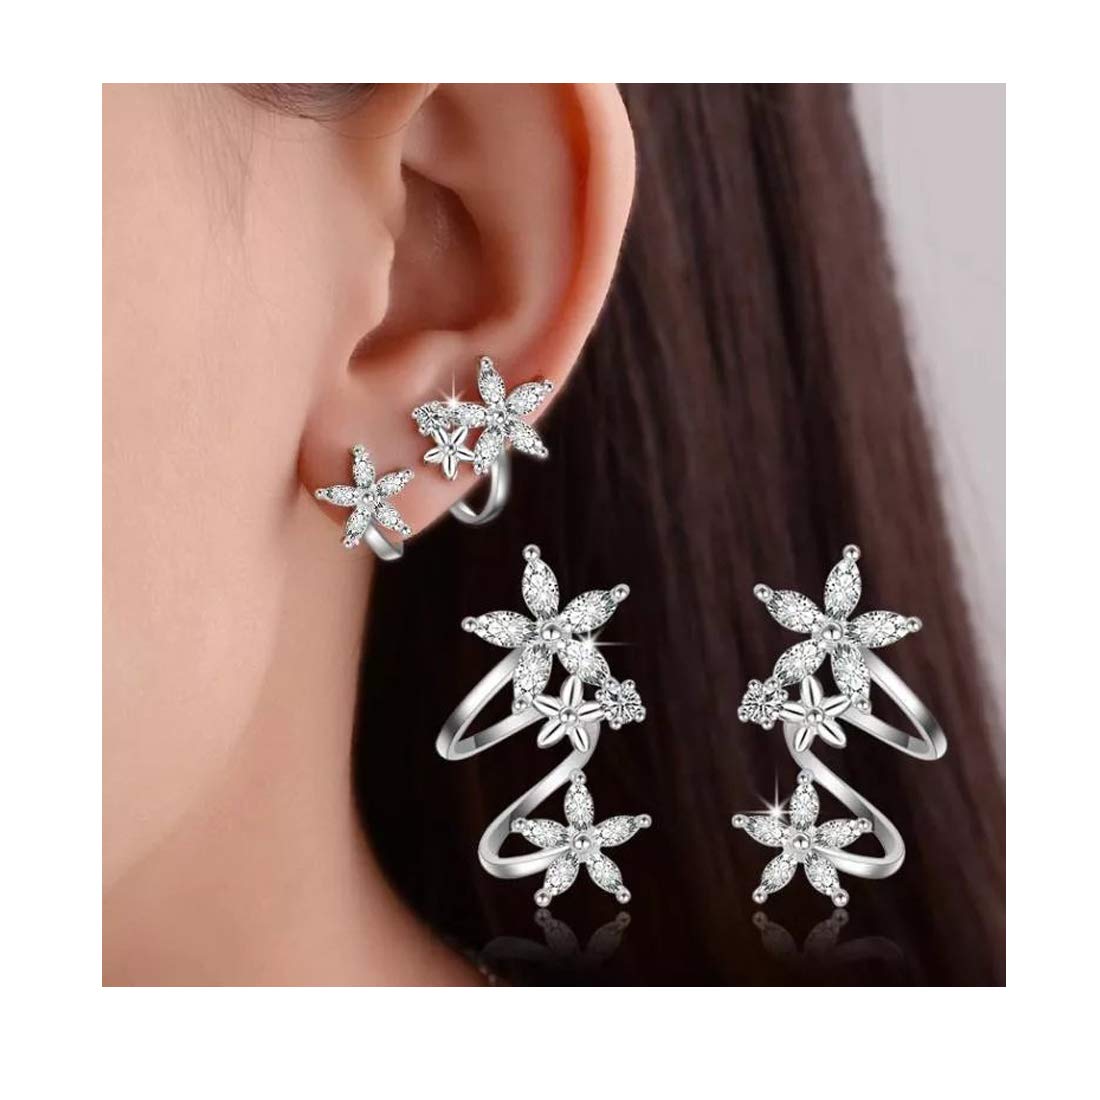 Yellow Chimes Earrings for Women and Girls | Fashion Crystal Stoned Silver Ear Cuff Earring | Silver Toned Ear Cuffs | Floral Designed Western Ear Cuffs | Accessories Jewellery for Women | Birthday Gift for Girls and Women Anniversary Gift for Wife